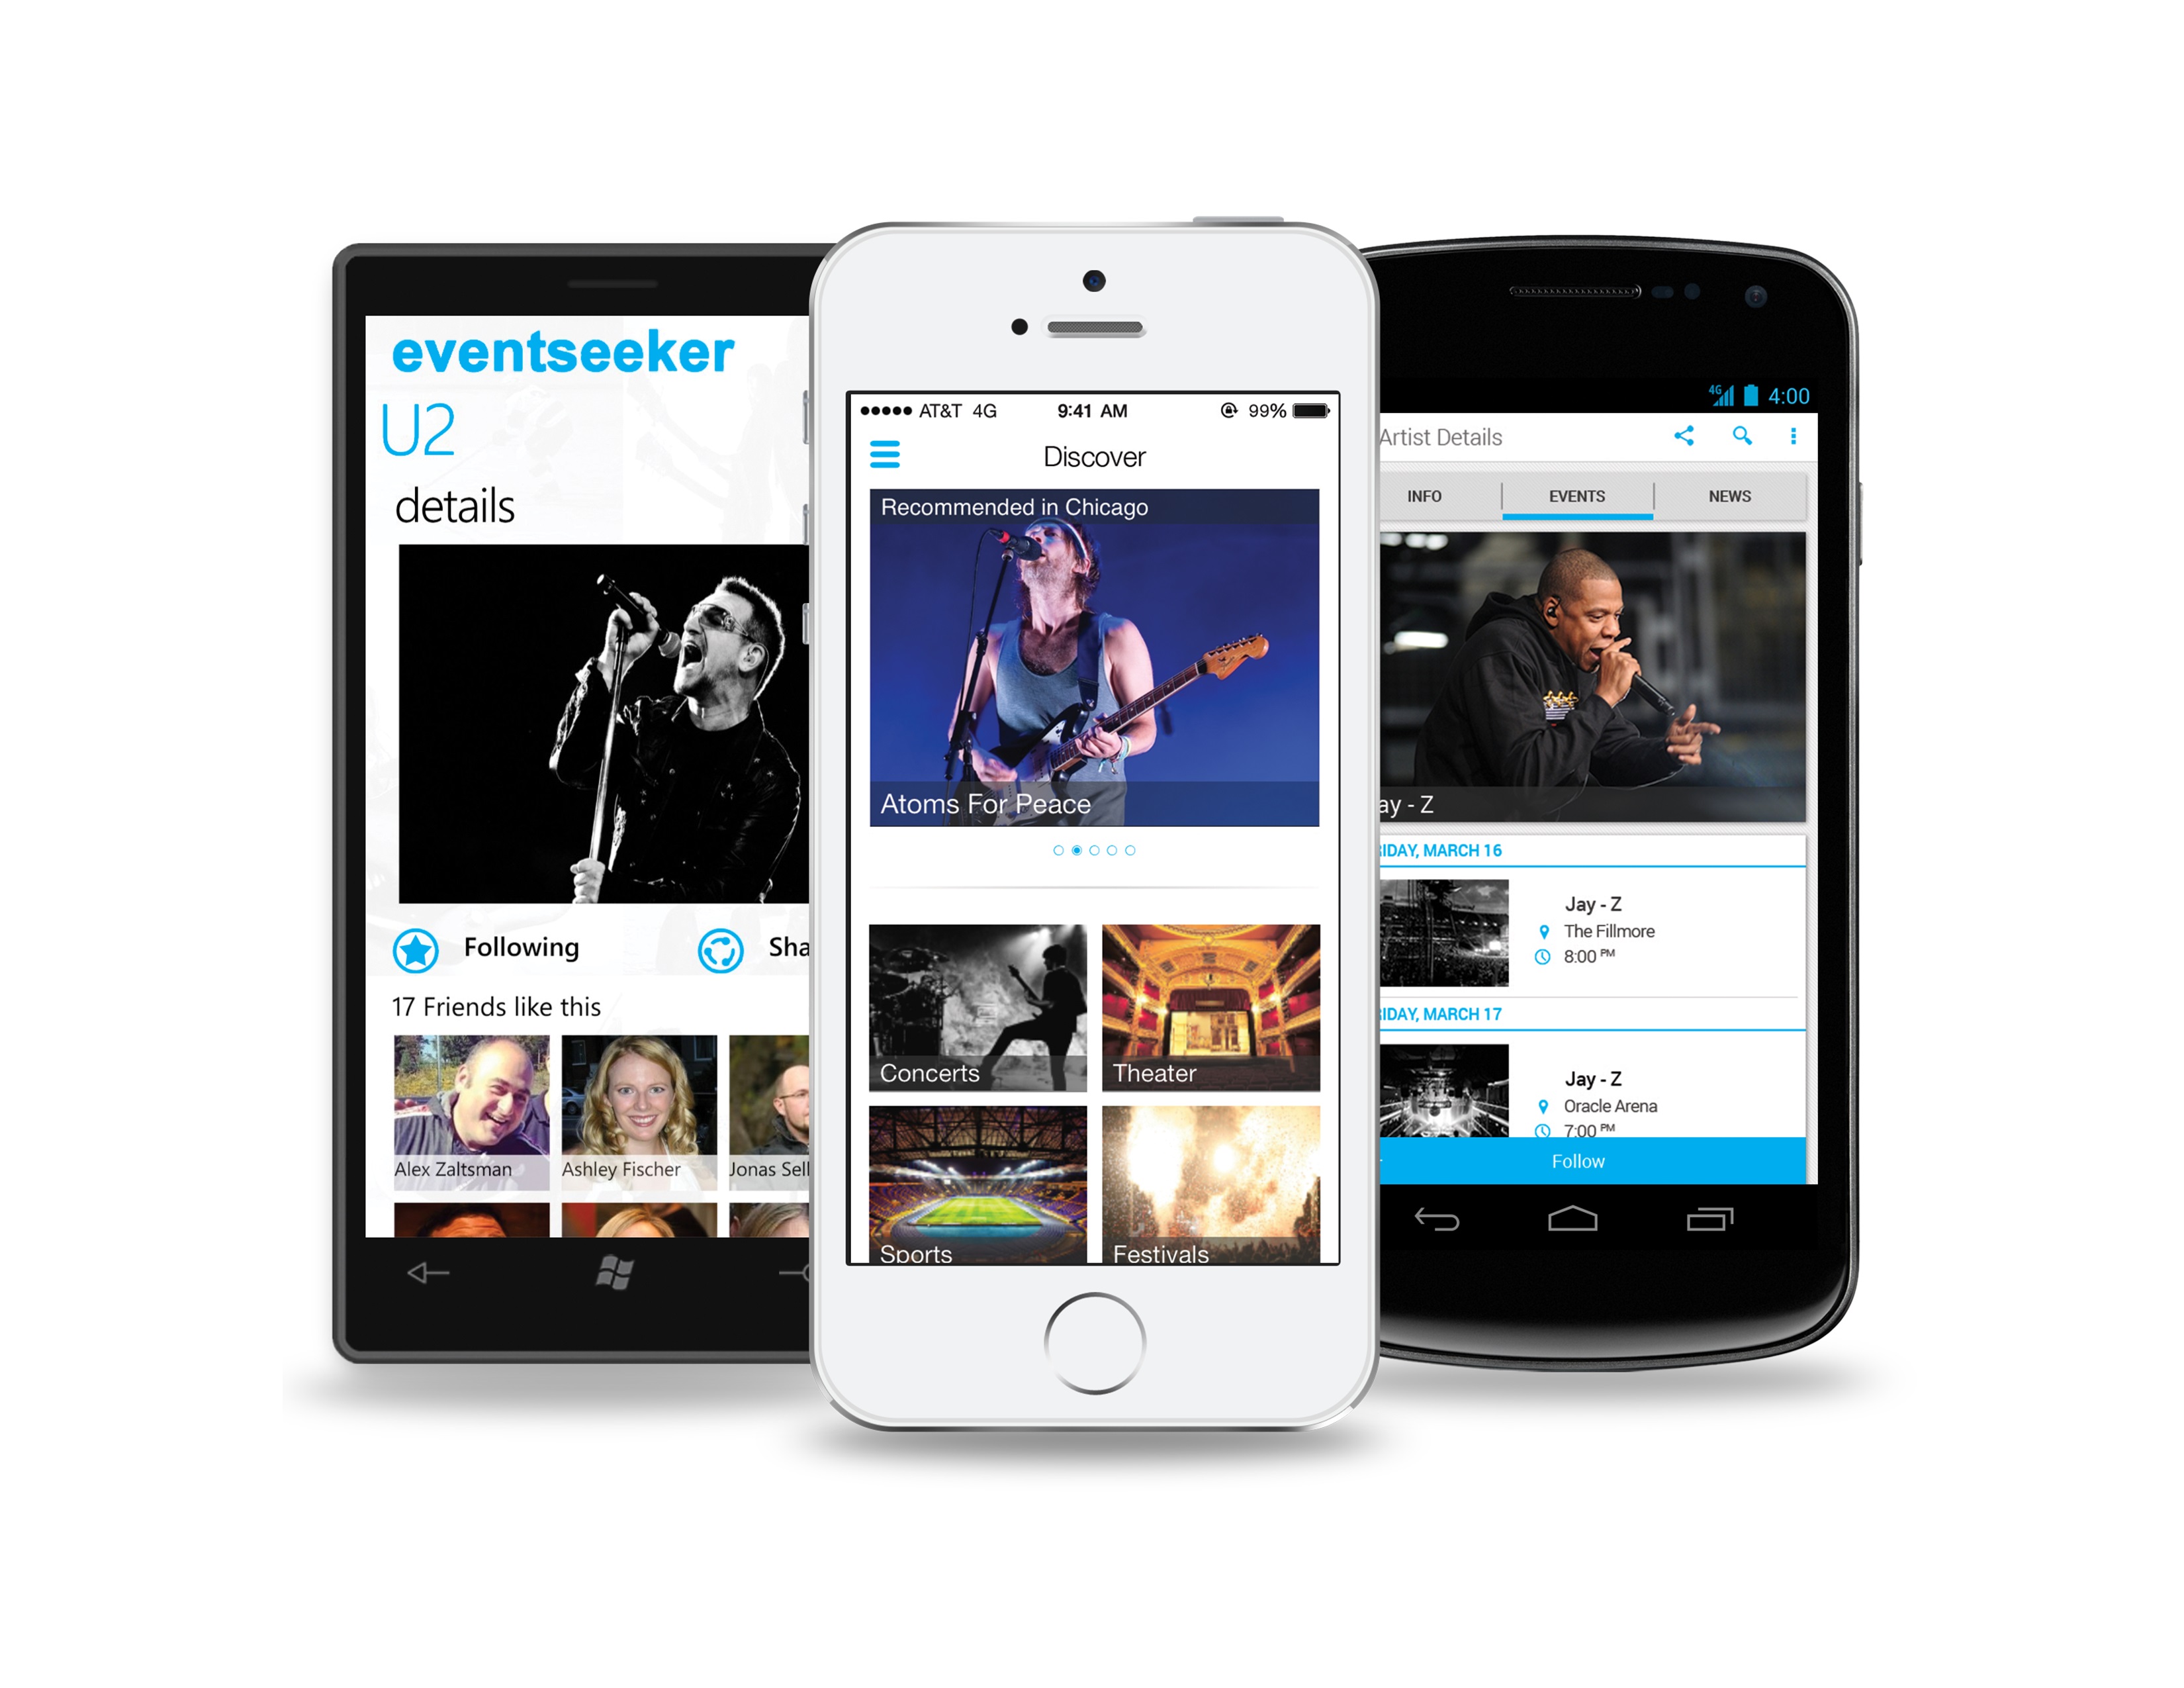 eventseeker on mobile devices